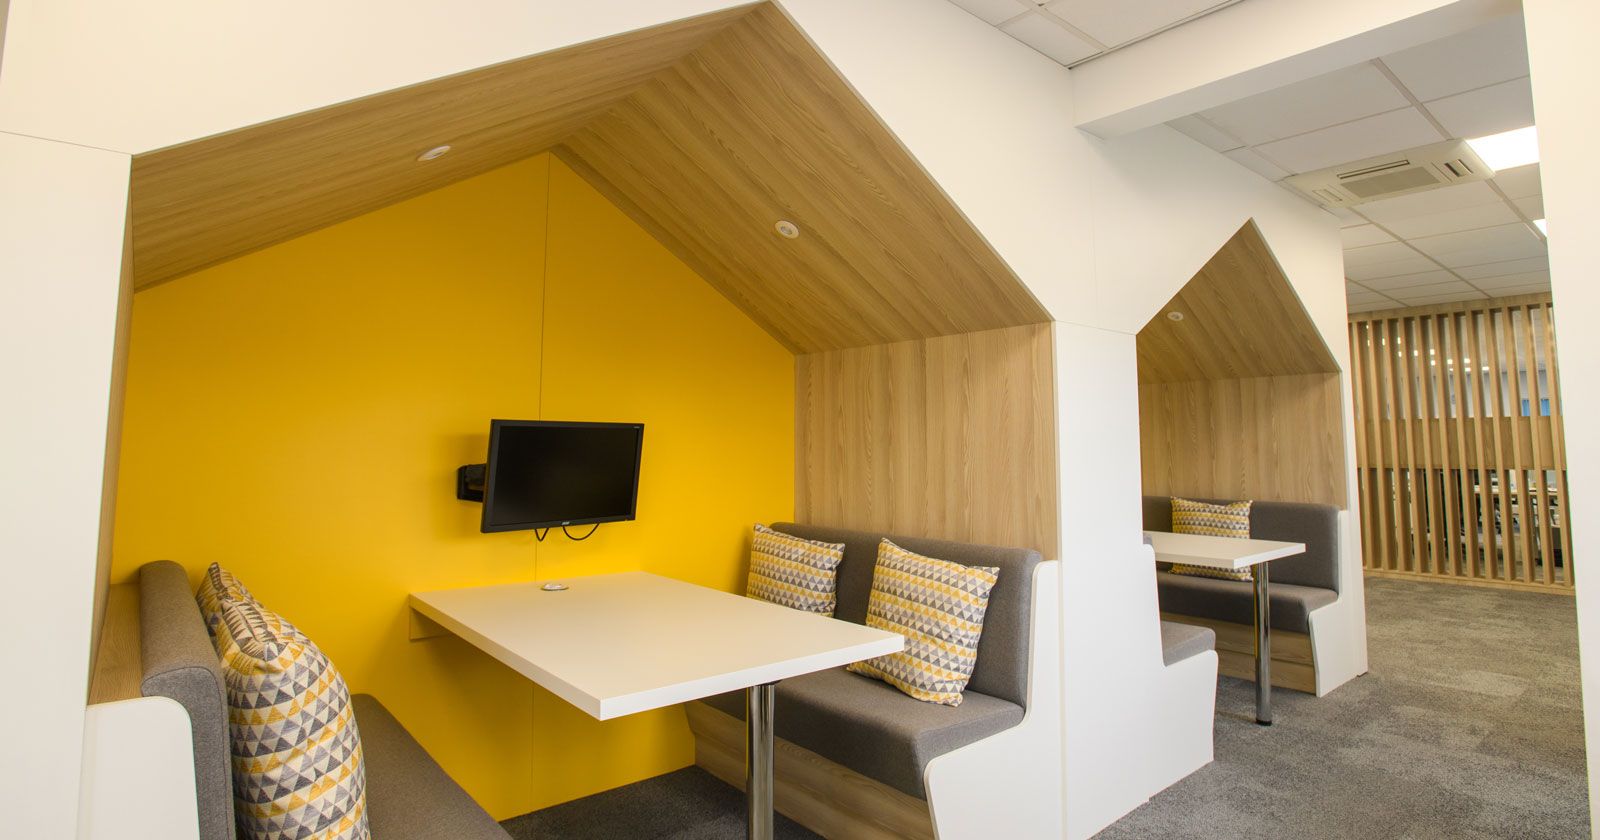 Charnwood-Accountants-Break-Out-Area-meeting-pod-Designed-built-and-installed-by-APSS-joinery